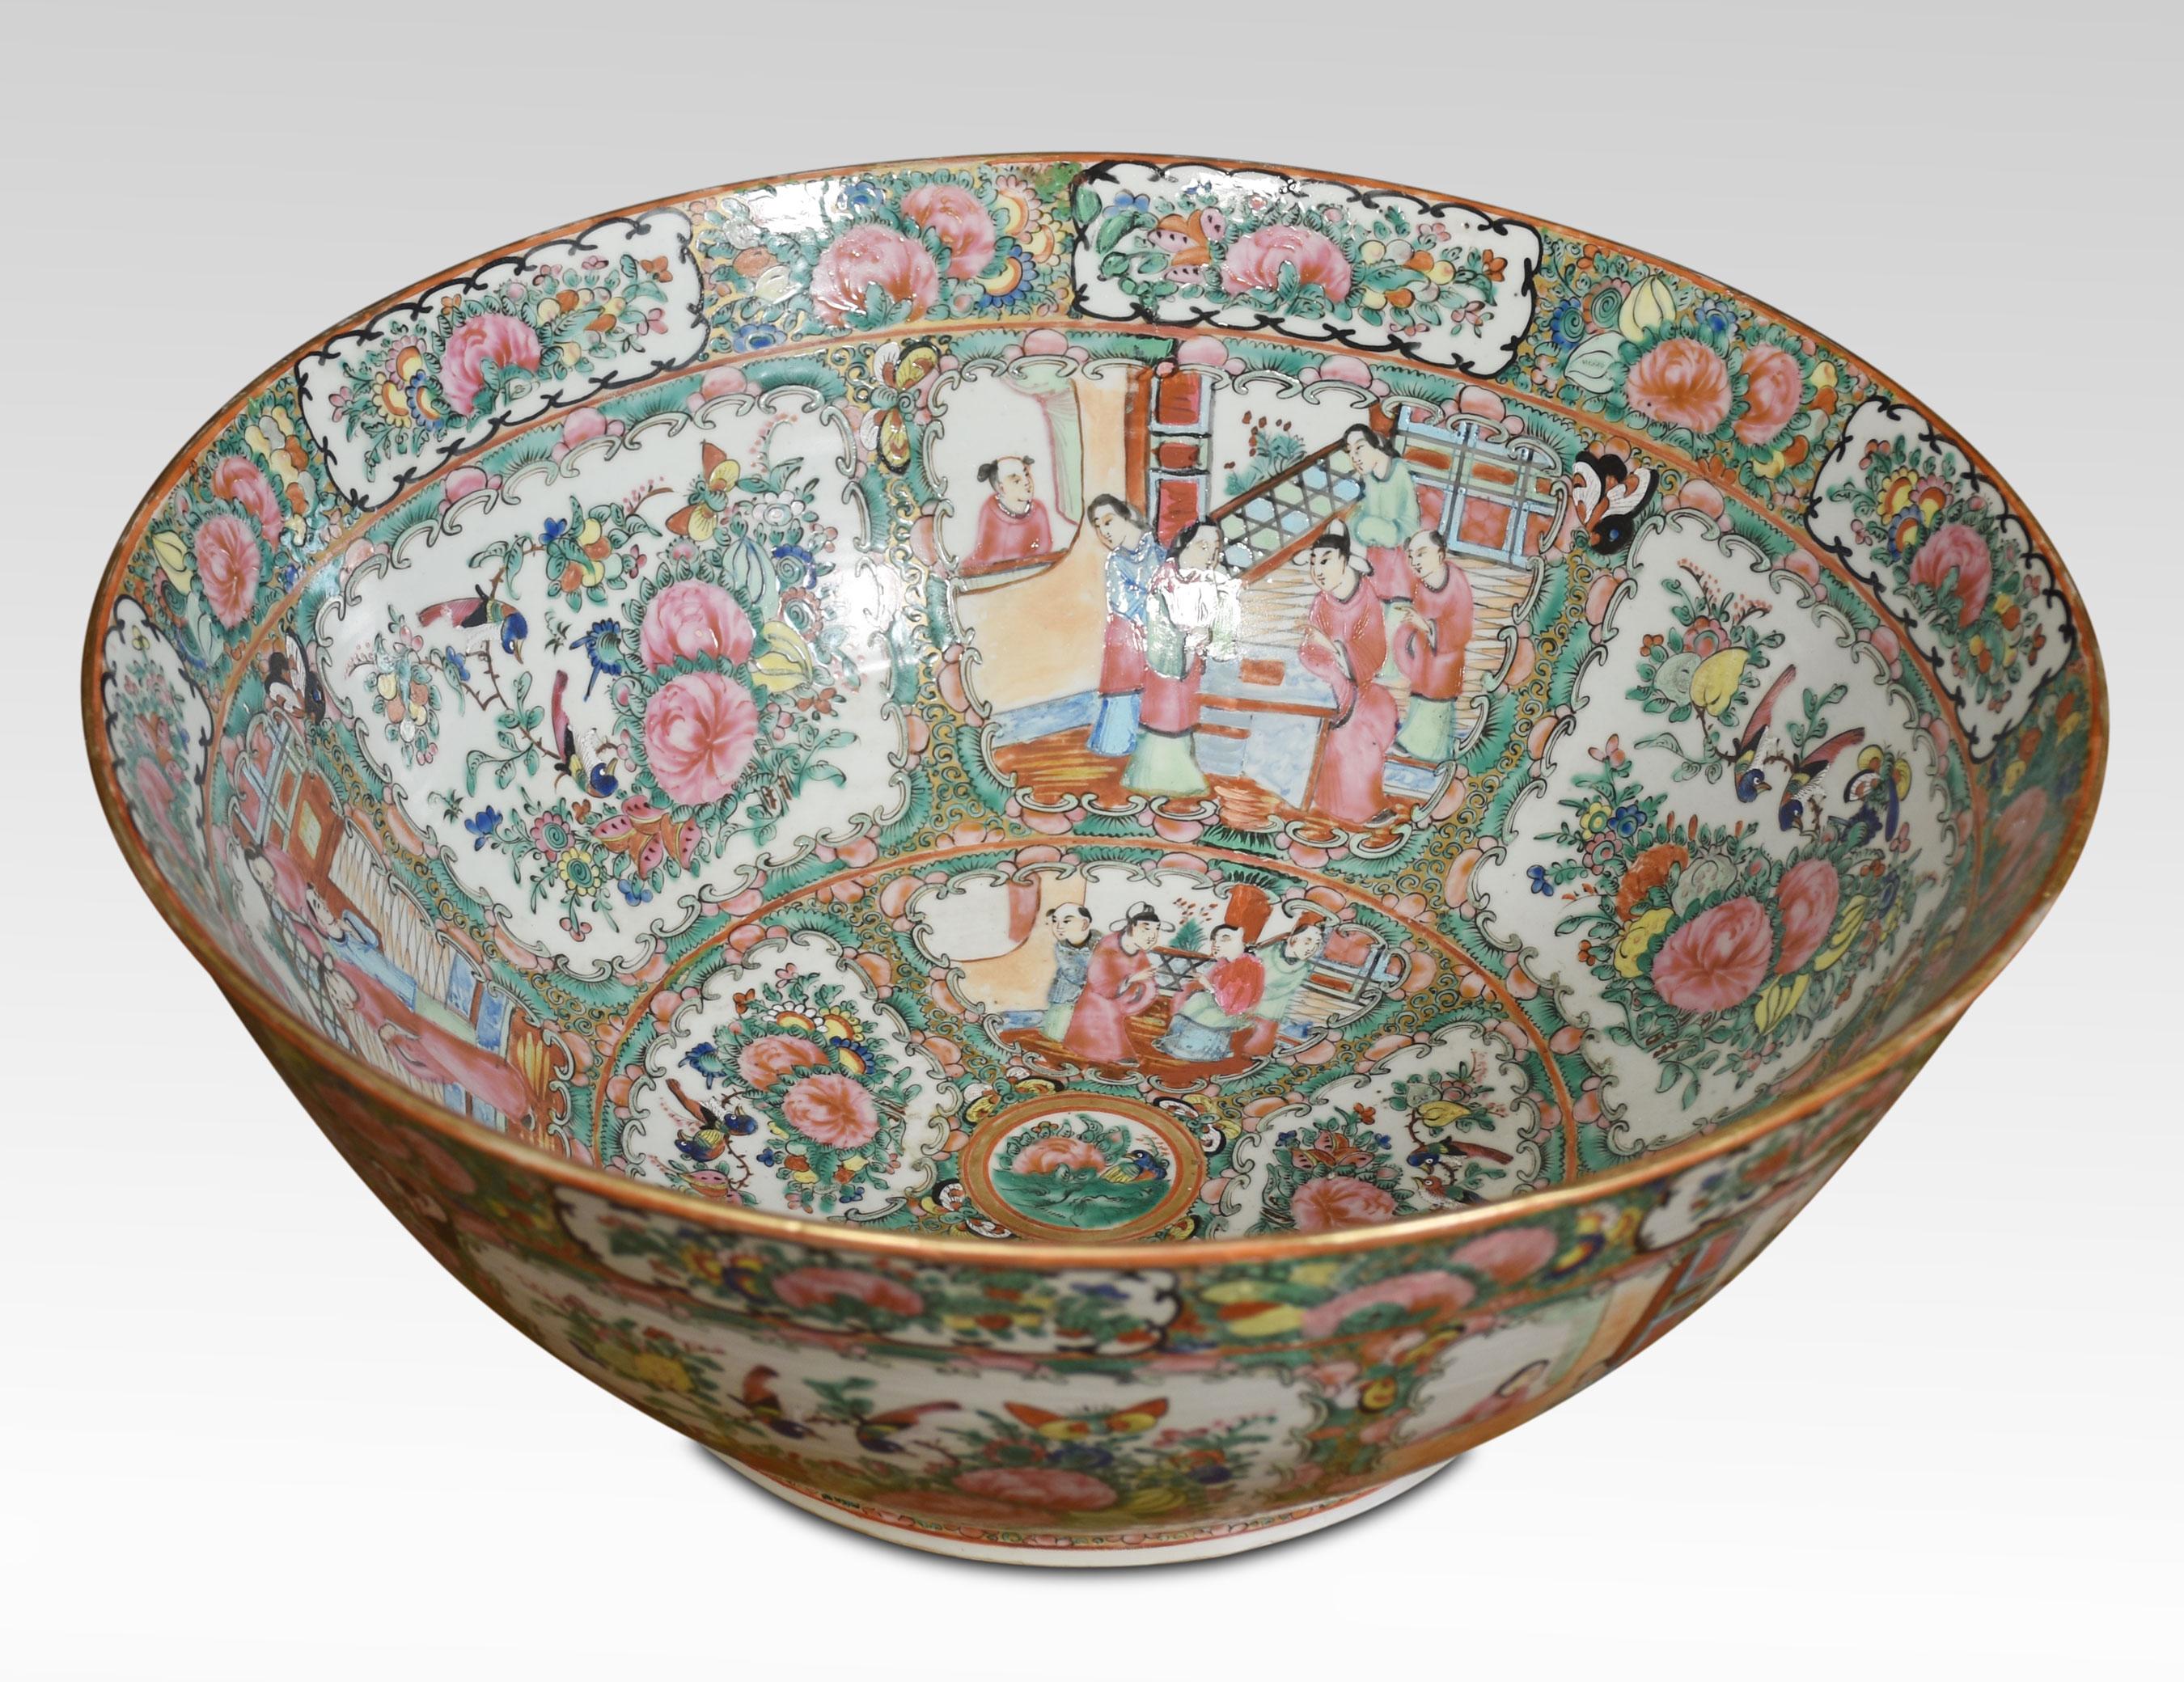 19th century enamelled Chinese export porcelain Canton Famille rose punchbowl. Enamelled with panels of scholars beneath a gilt band of butterflies, birds and flowers. (signs of an old repair)
Dimensions
Height 6.5 Inches
Width 15.5 Inches
Depth